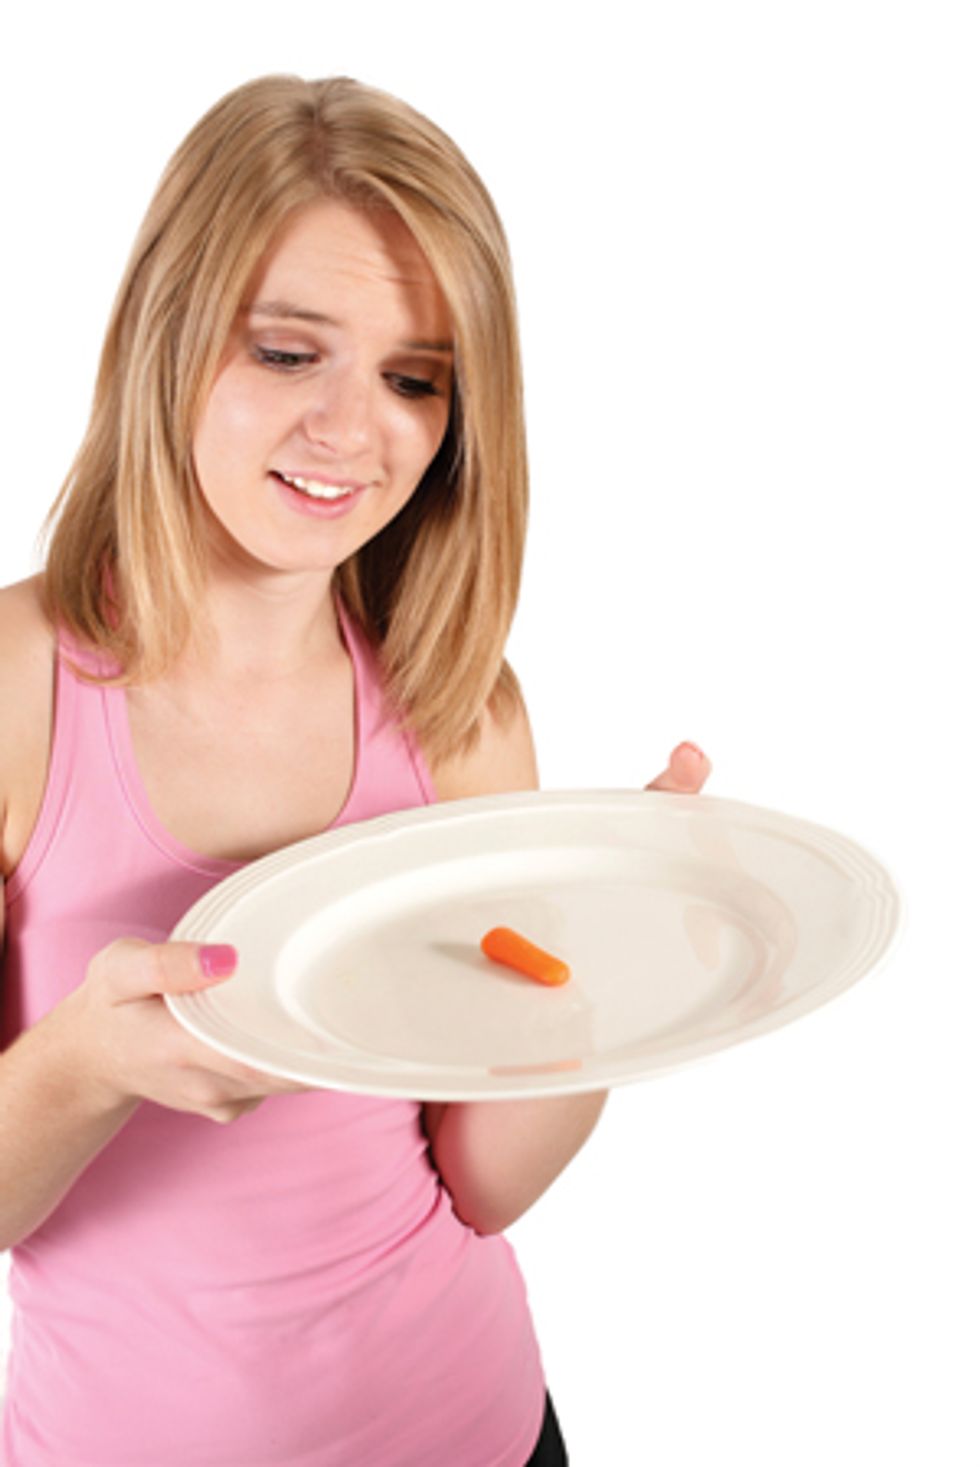 5 Reasons Not to Diet Through Your Teen Years